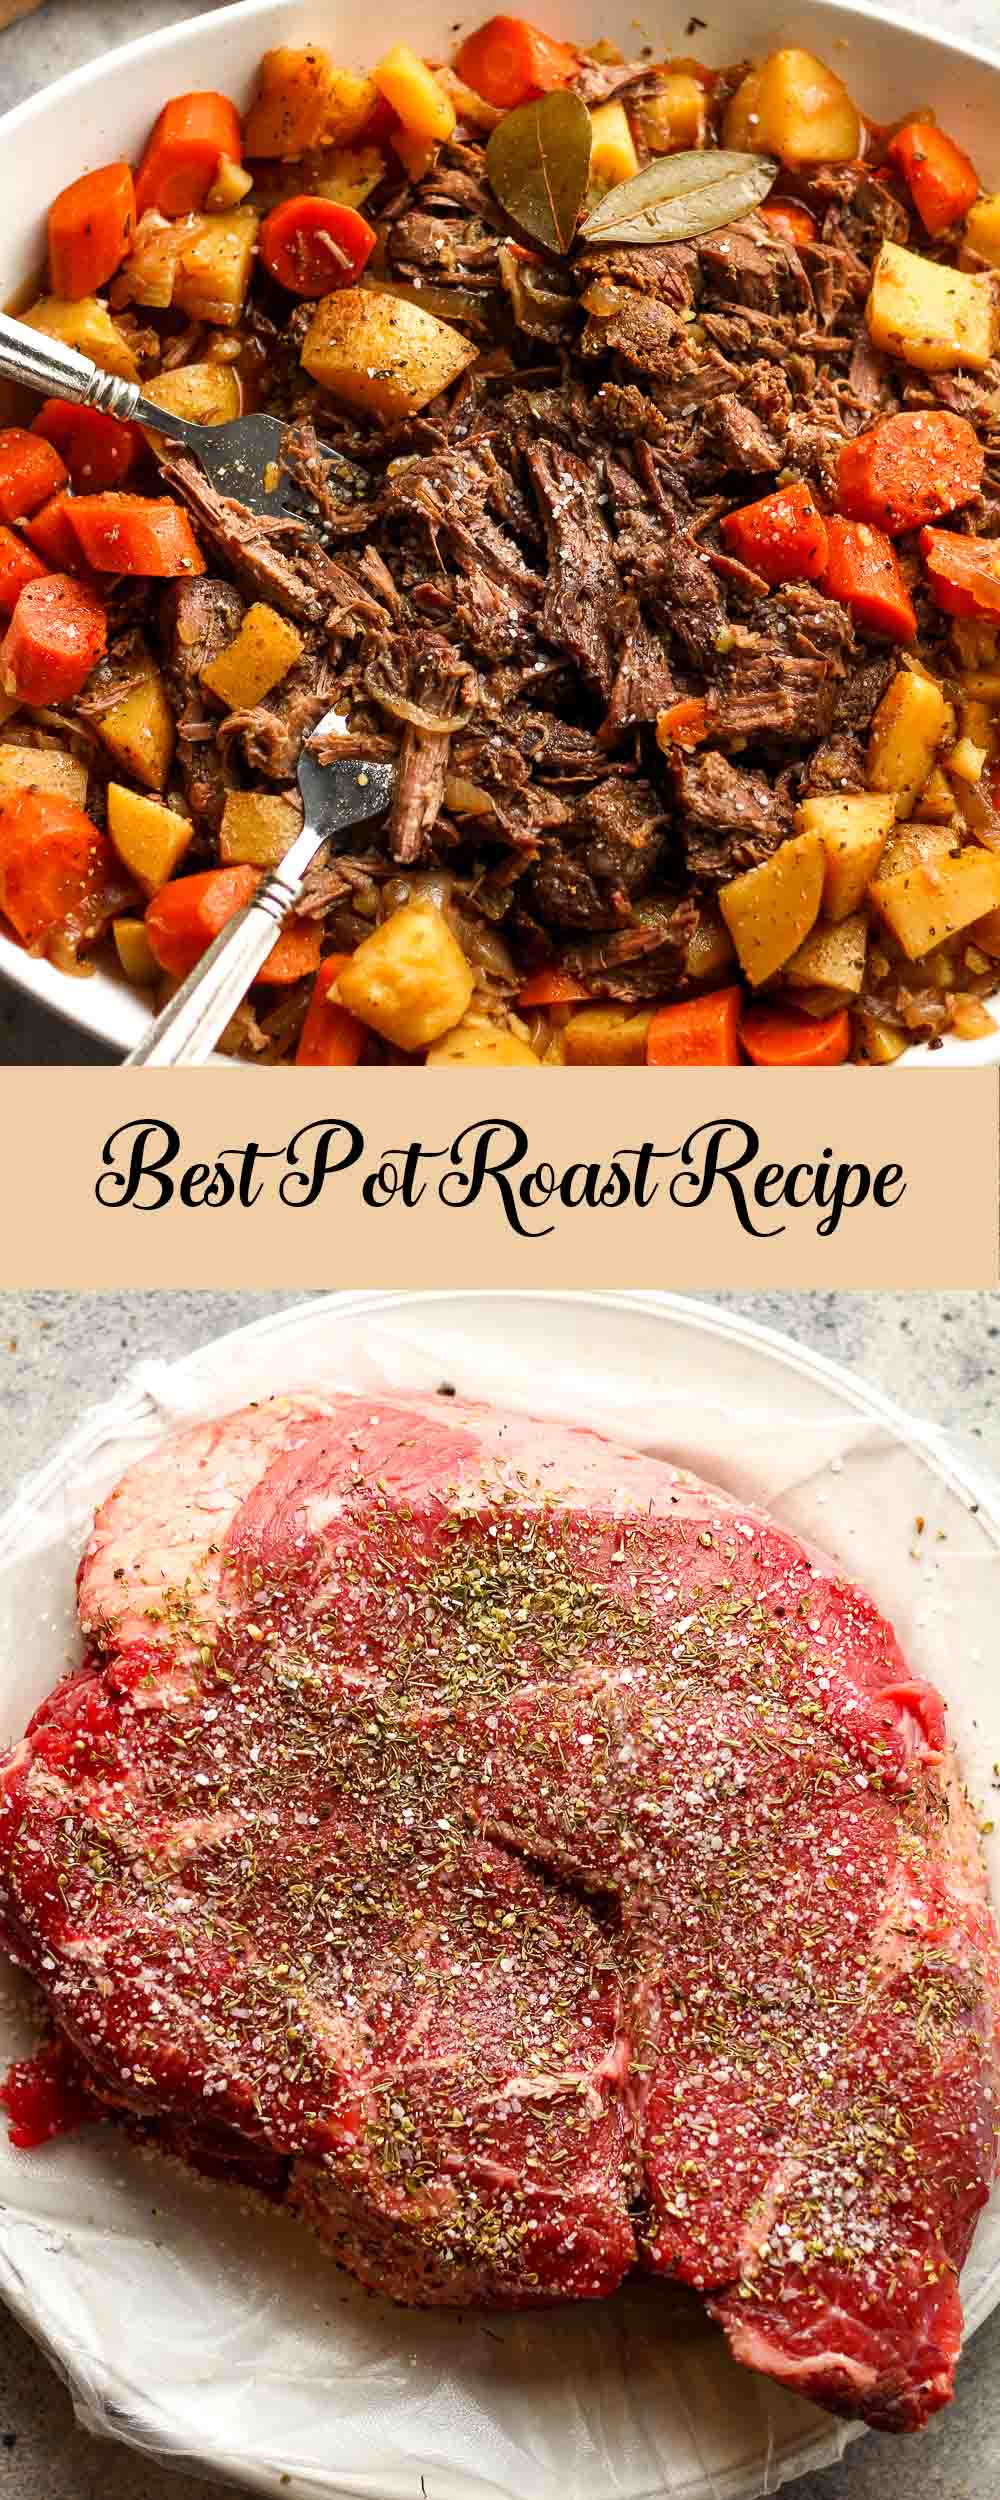 A collage of photos - the finished pot roast and the raw chunk of beef.